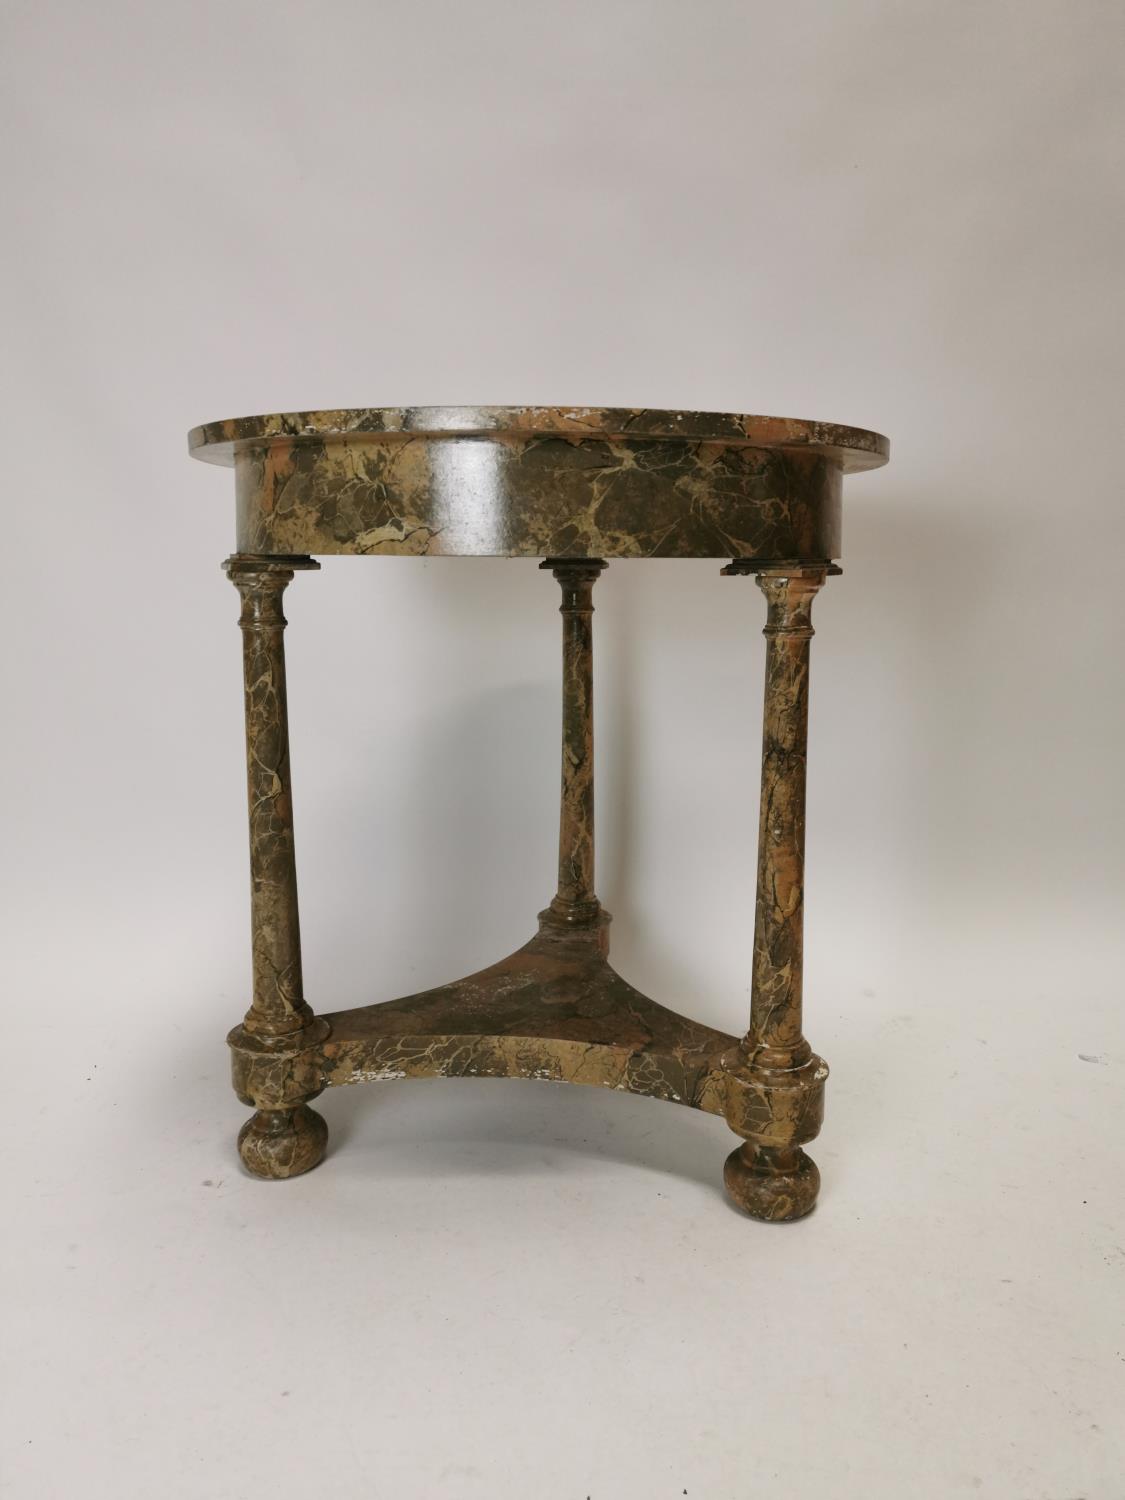 Late 19th C. marbleised pine centre table on turned legs {70 cm H x 85 cm Dia}. - Image 2 of 4